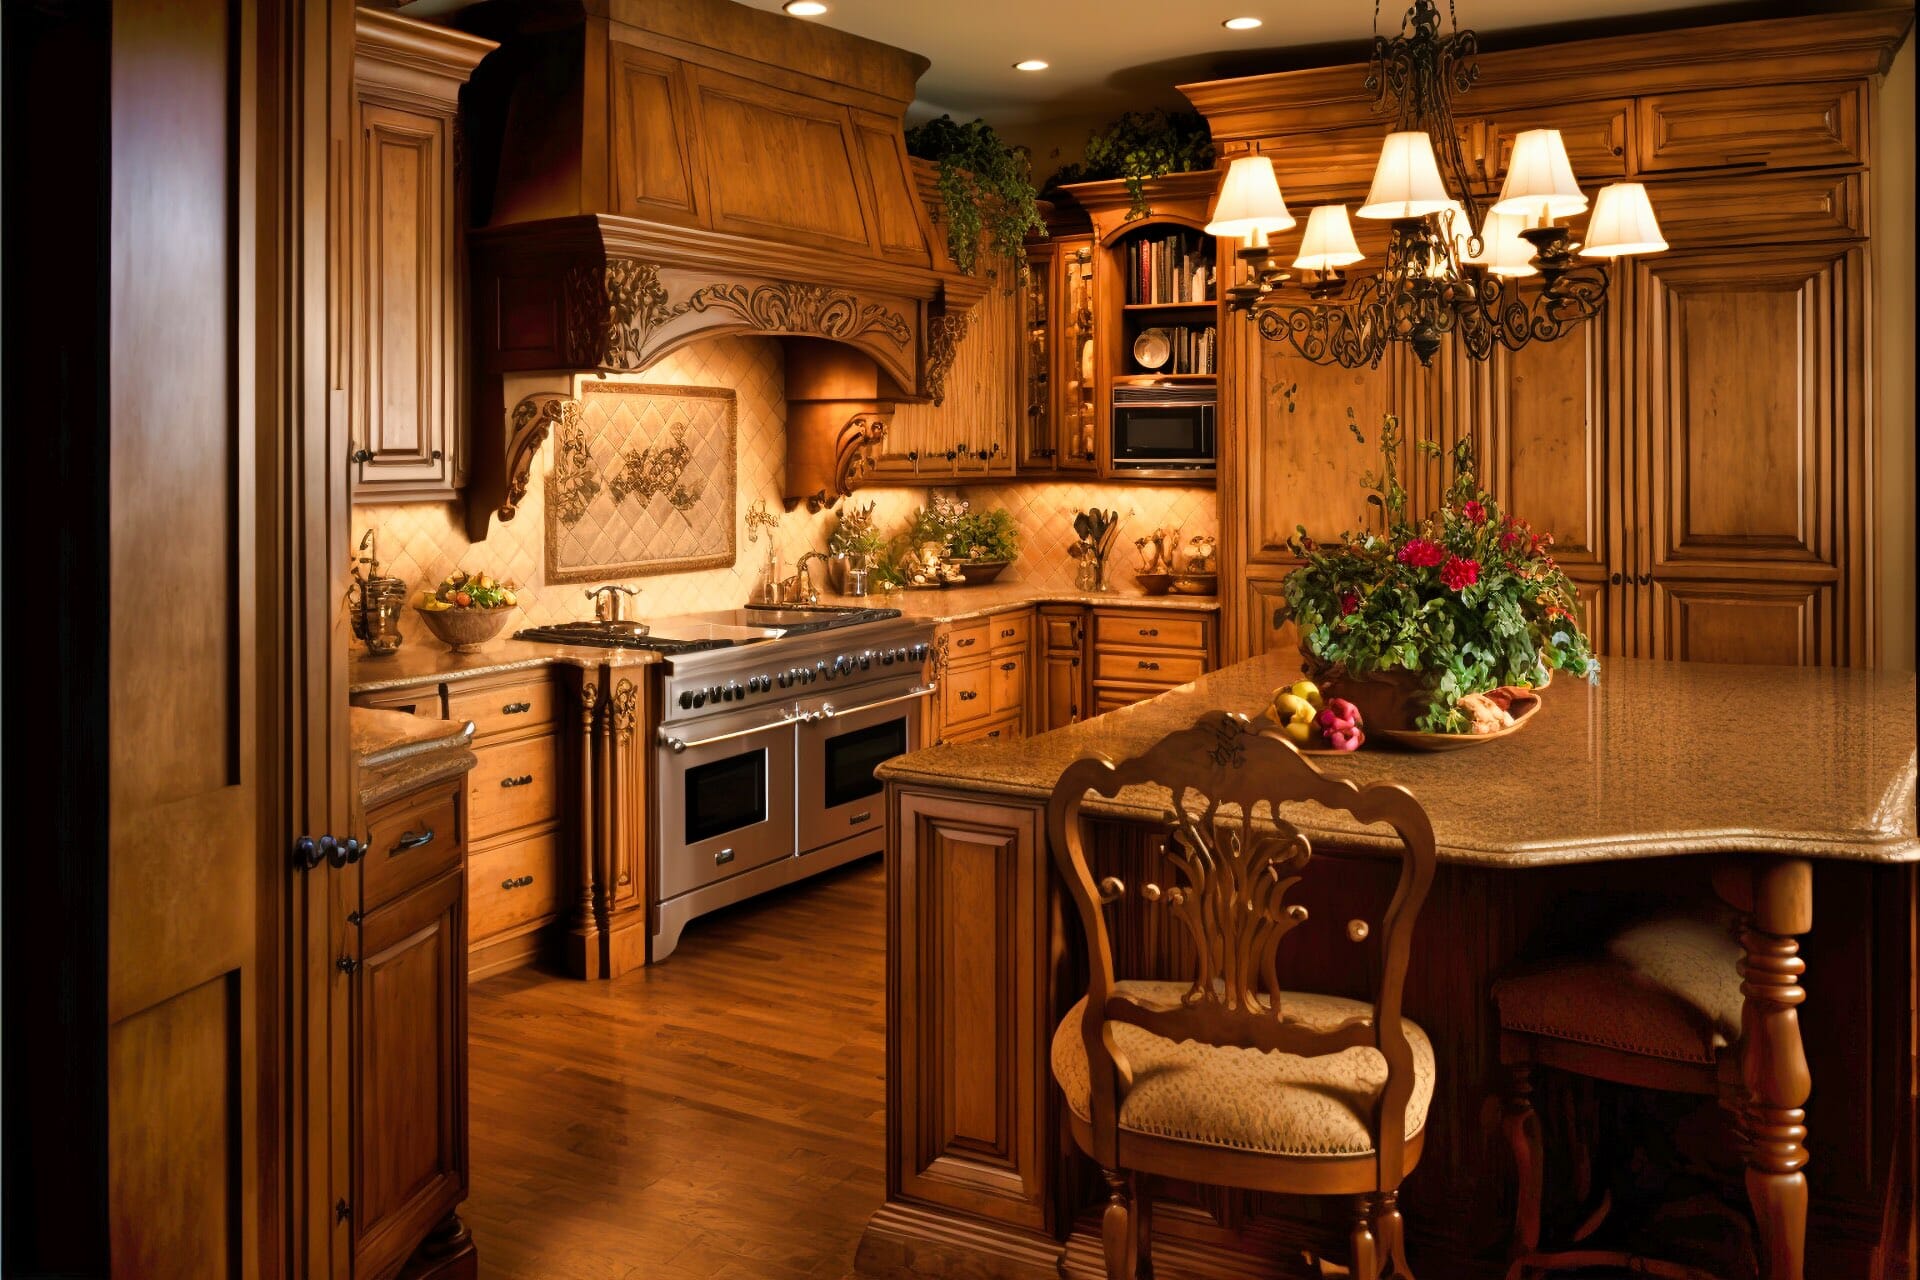 A Cozy, Homey Kitchen With Warm Oak Cabinetry, A Textured Backsplash, And An Ornate Chandelier.